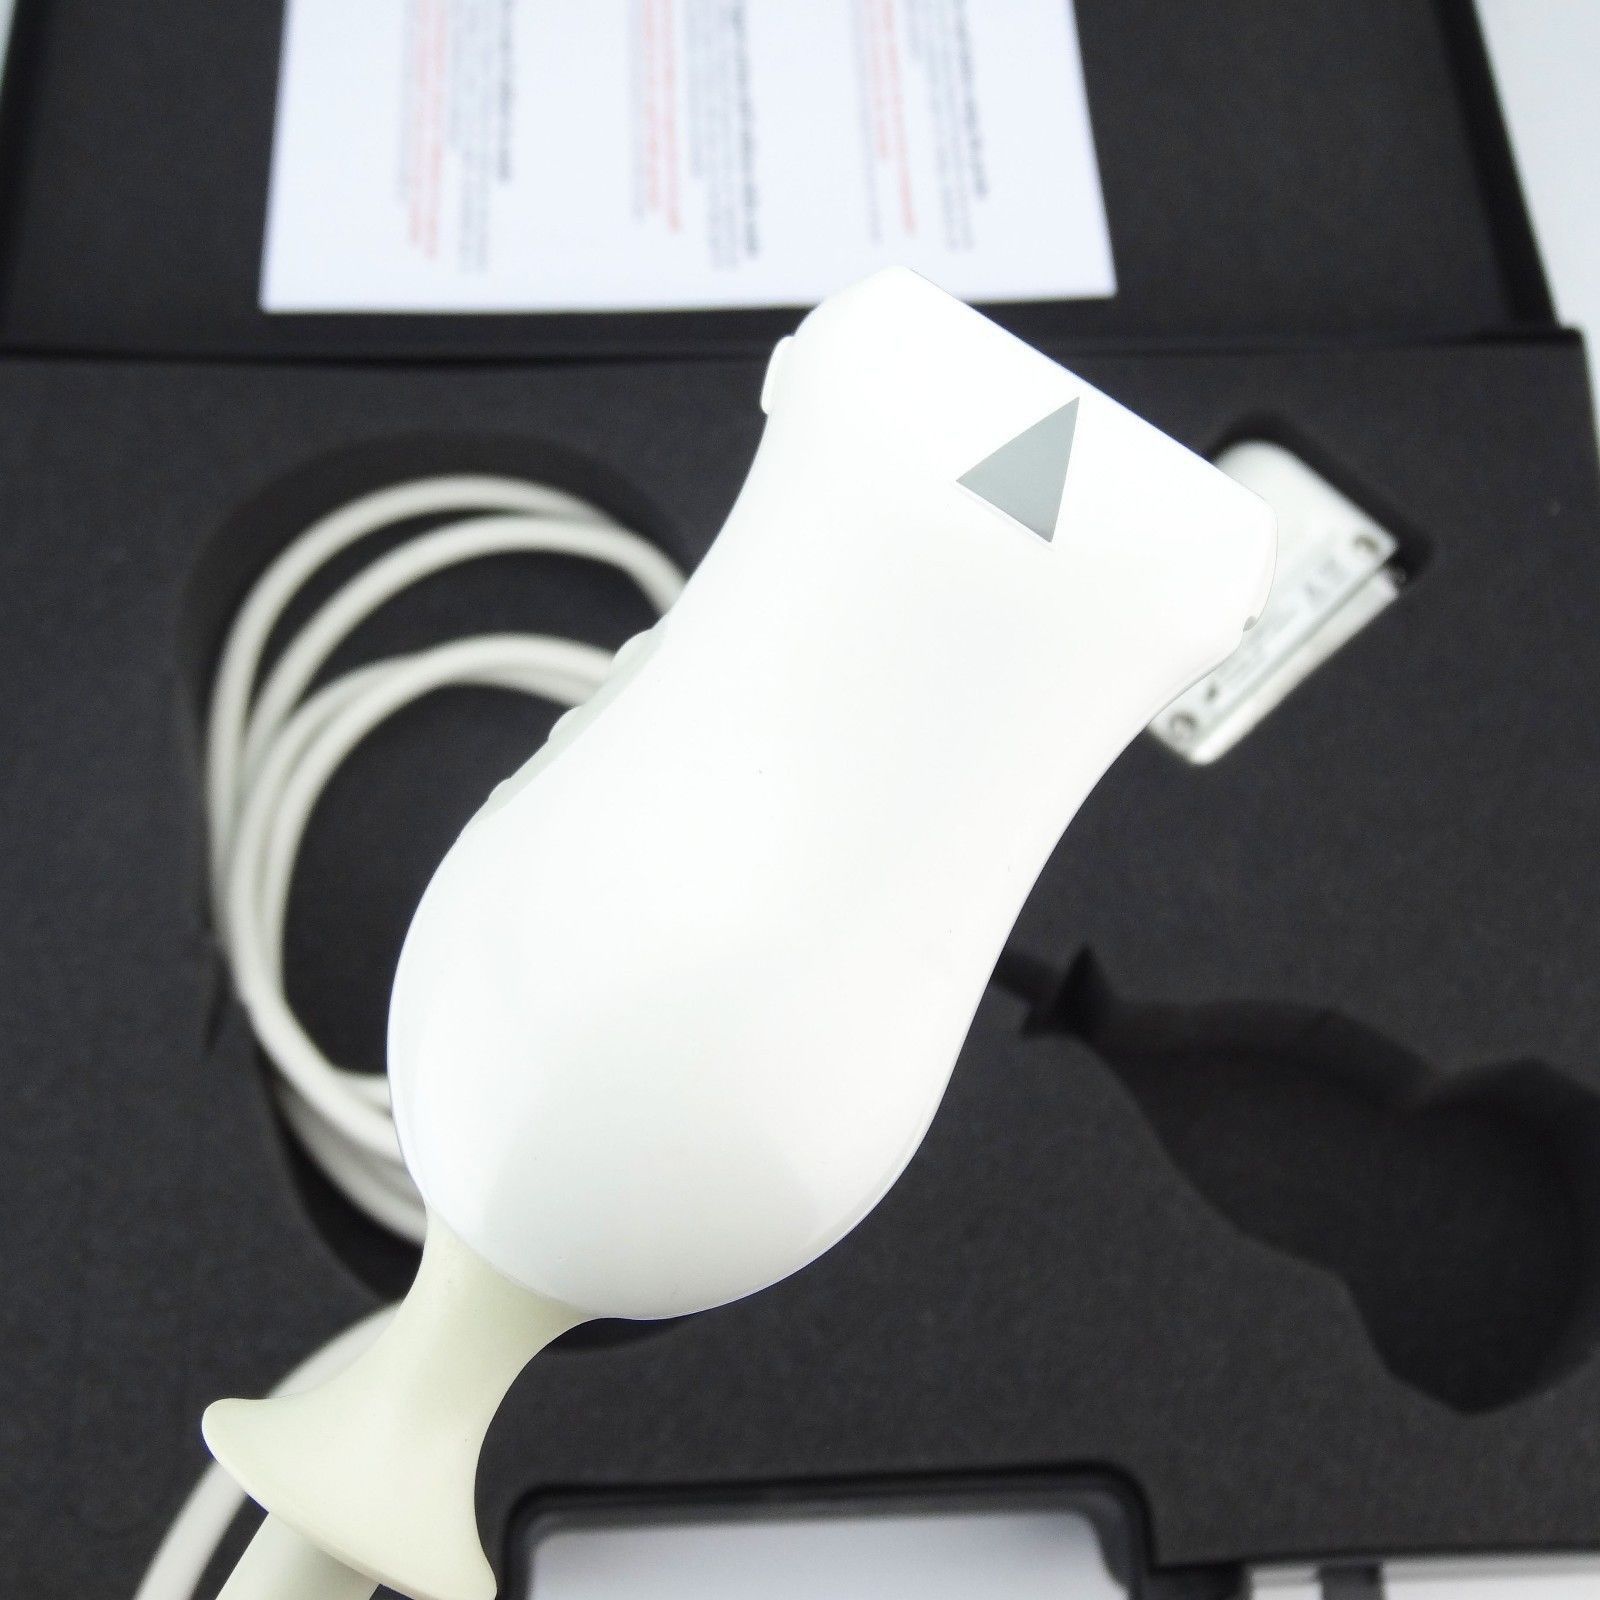 Esaote SL3235 Linear Ultrasound Transducer Probe 28mm, 18-6 MHz DIAGNOSTIC ULTRASOUND MACHINES FOR SALE